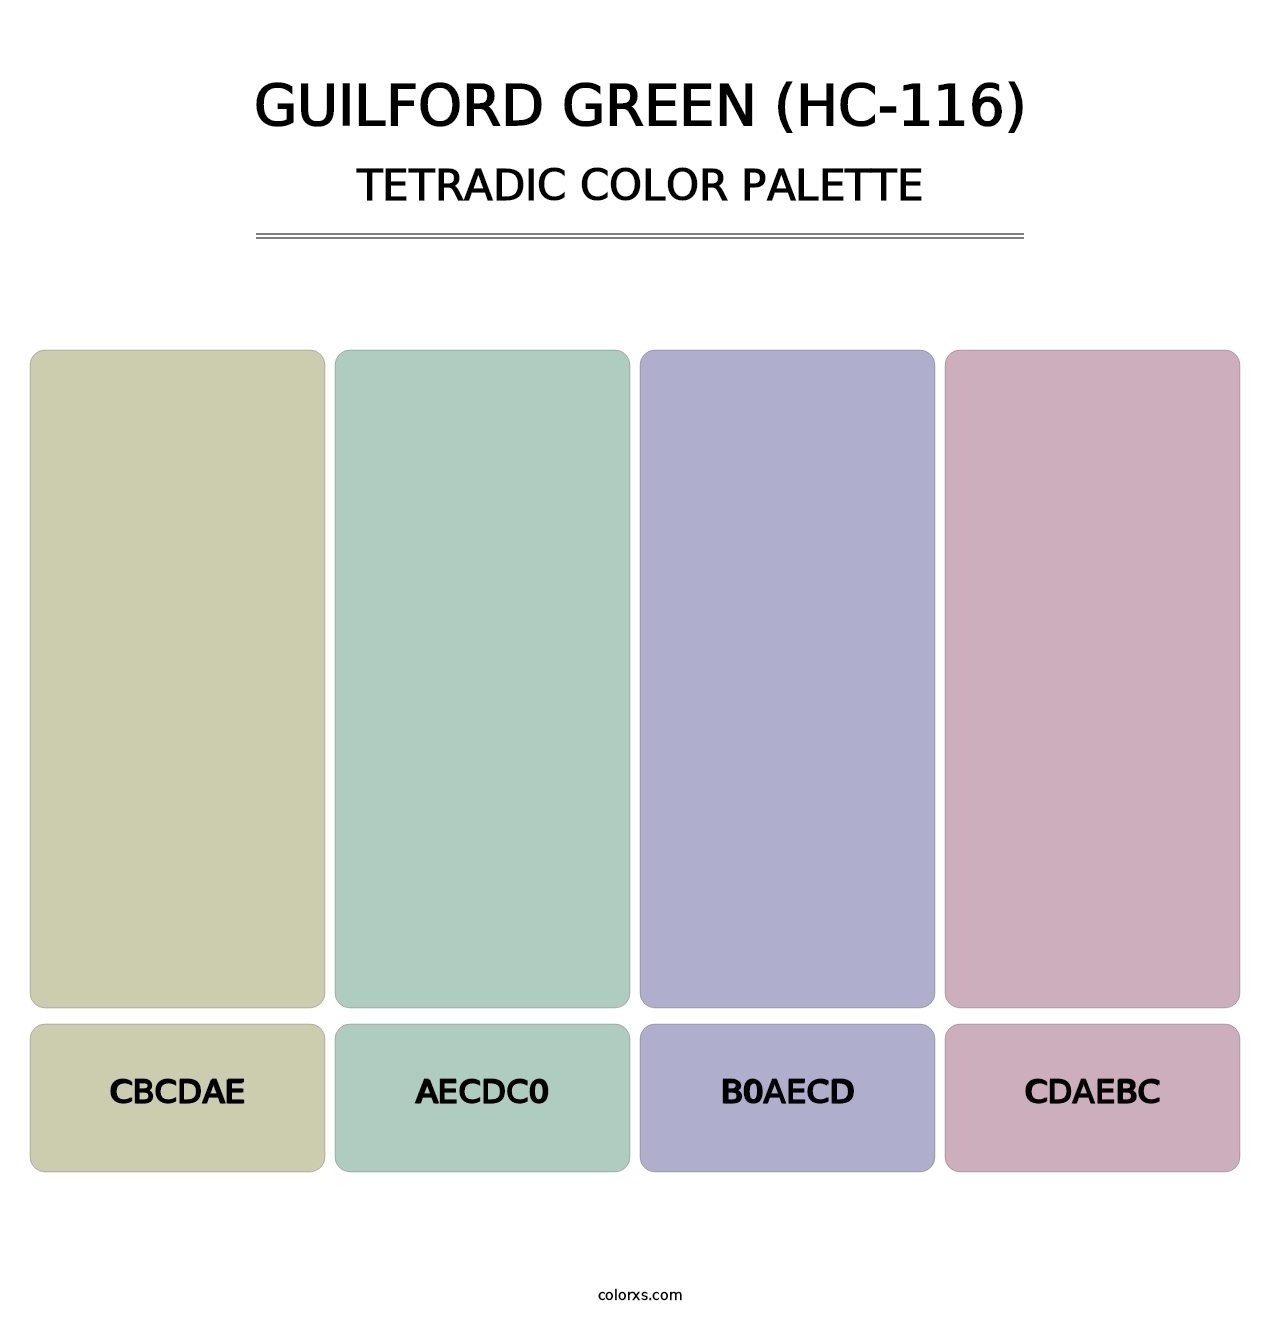 Guilford Green (HC-116) - Tetradic Color Palette